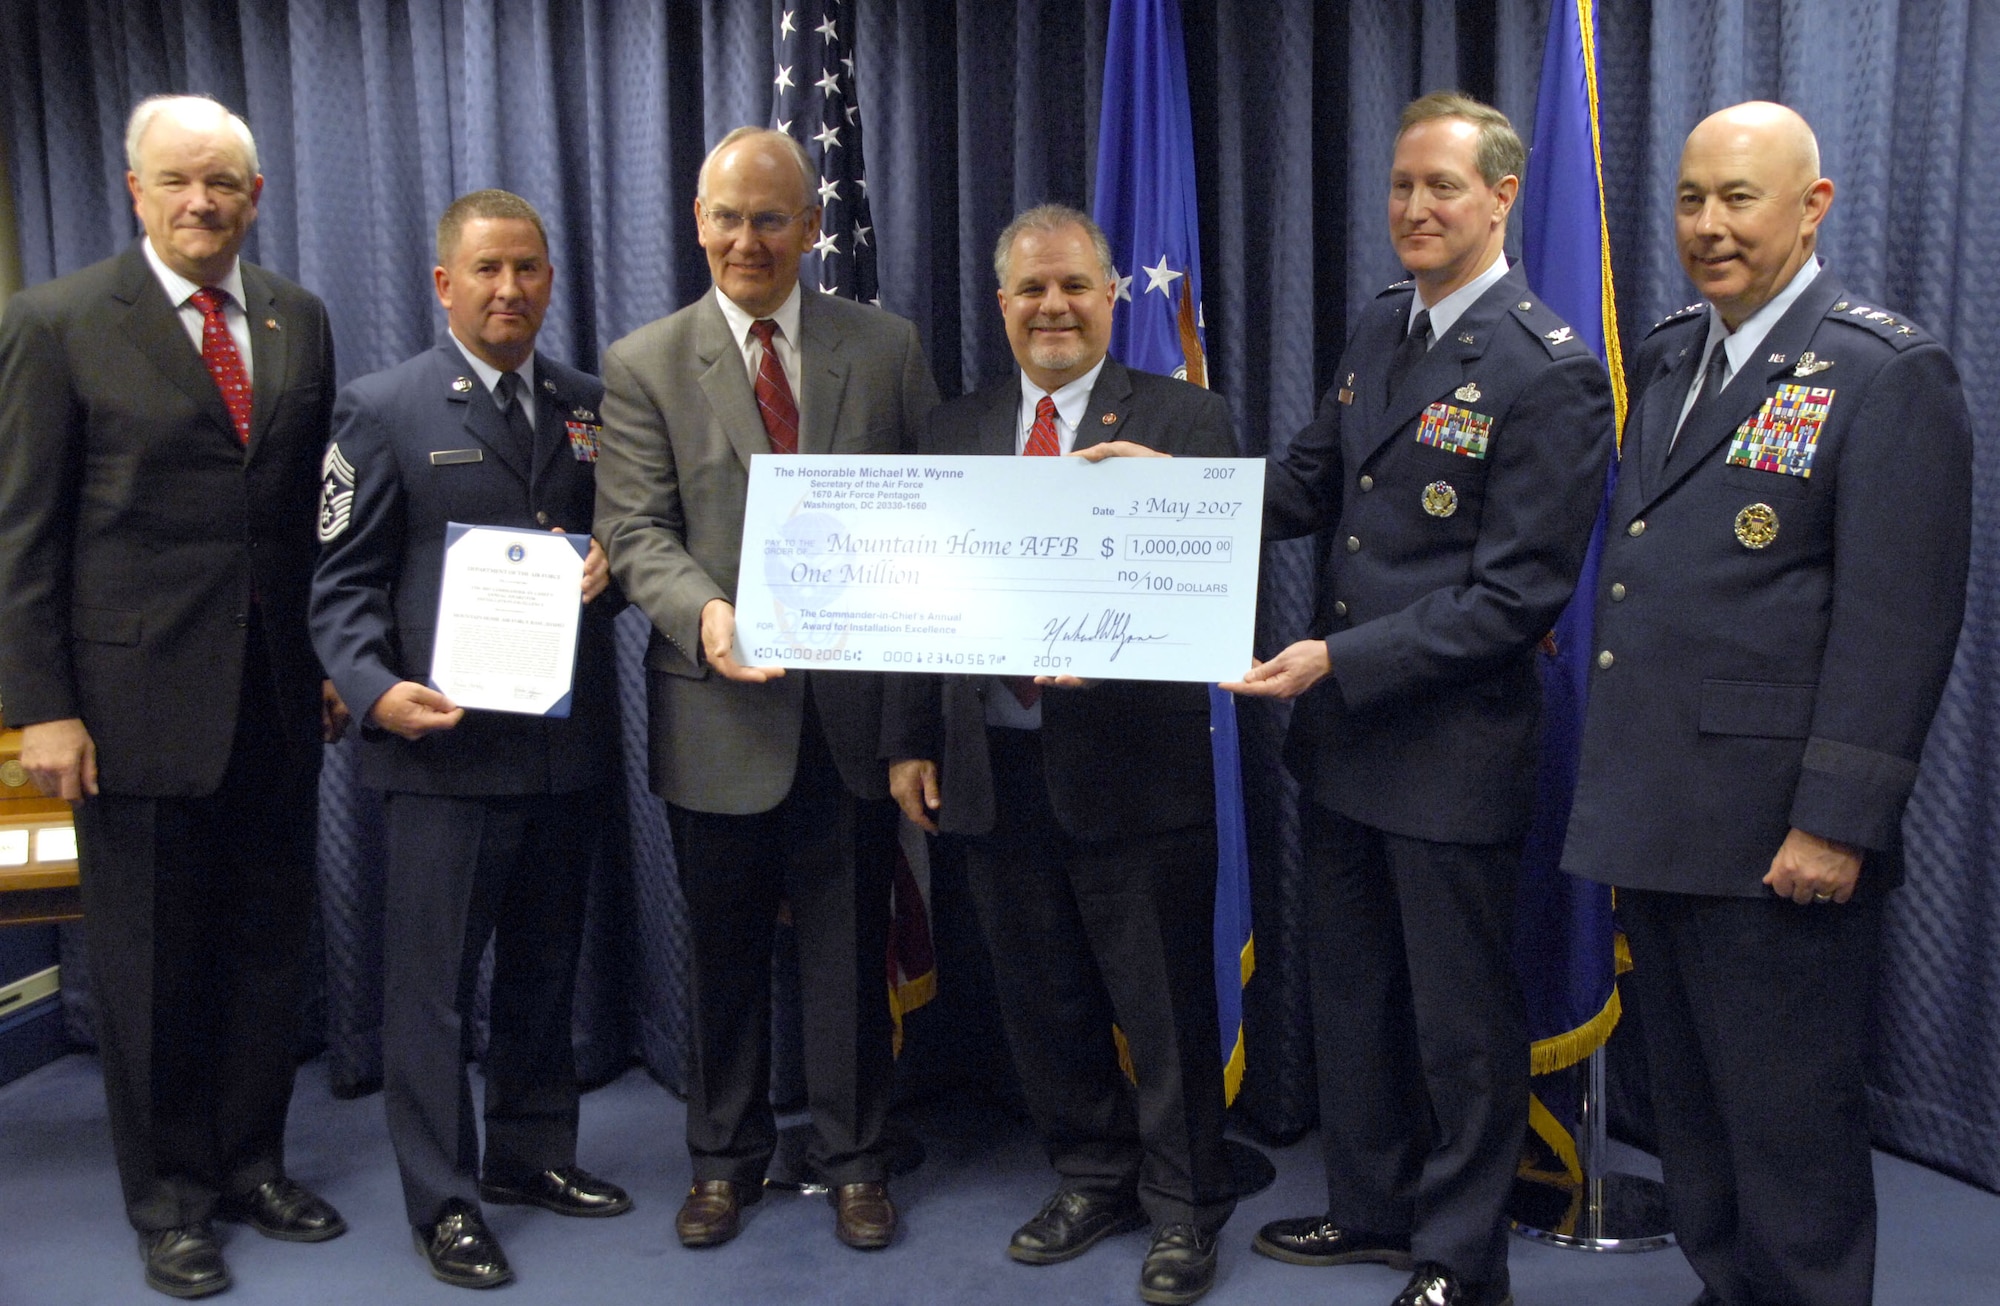 Secretary of the Air Force Michael Wynne, the 366 Fighter Wing Command Chief Allen Niksich, Idaho senator Larry Craig, Congressman Bill Sali, the 366th Mission Support Group commander Col.Tom Laffey and Air Force Chief of Staff T. Michael Moseley pose for a photo on May 3 with a $1 million check after the presentation of the 2007 Installation Excellence Award to Mountain Home Air Force Base, Idaho at the Pentagon in Washington, D.C. Standing out among the many great improvements made on the base was their robust energy program where they installed new boilers in multiple facilities, reducing heating costs by $1.2 million and later renegotiated natural gas rates, which slashed costs 24 percent, which in turn saved the base $800,000. (U.S. Air Force photo/Tech. Sgt. Cohen A. Young